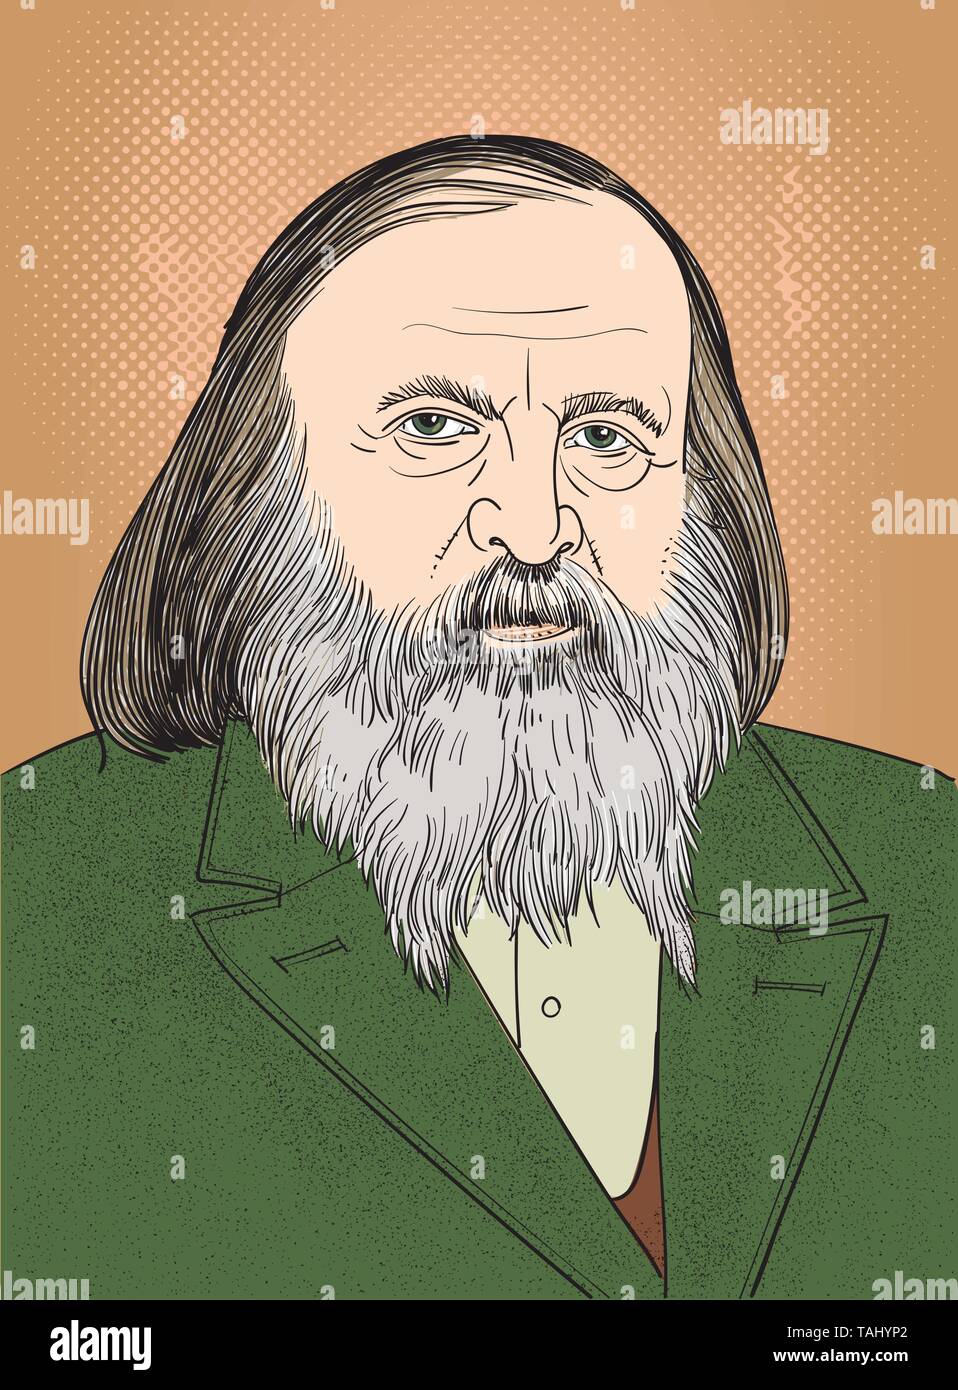 Dmitri Mendeleev (1834-1907) portrait in line art illustration. He was a Russian chemist who developed the periodic classification of the elements. Stock Vector